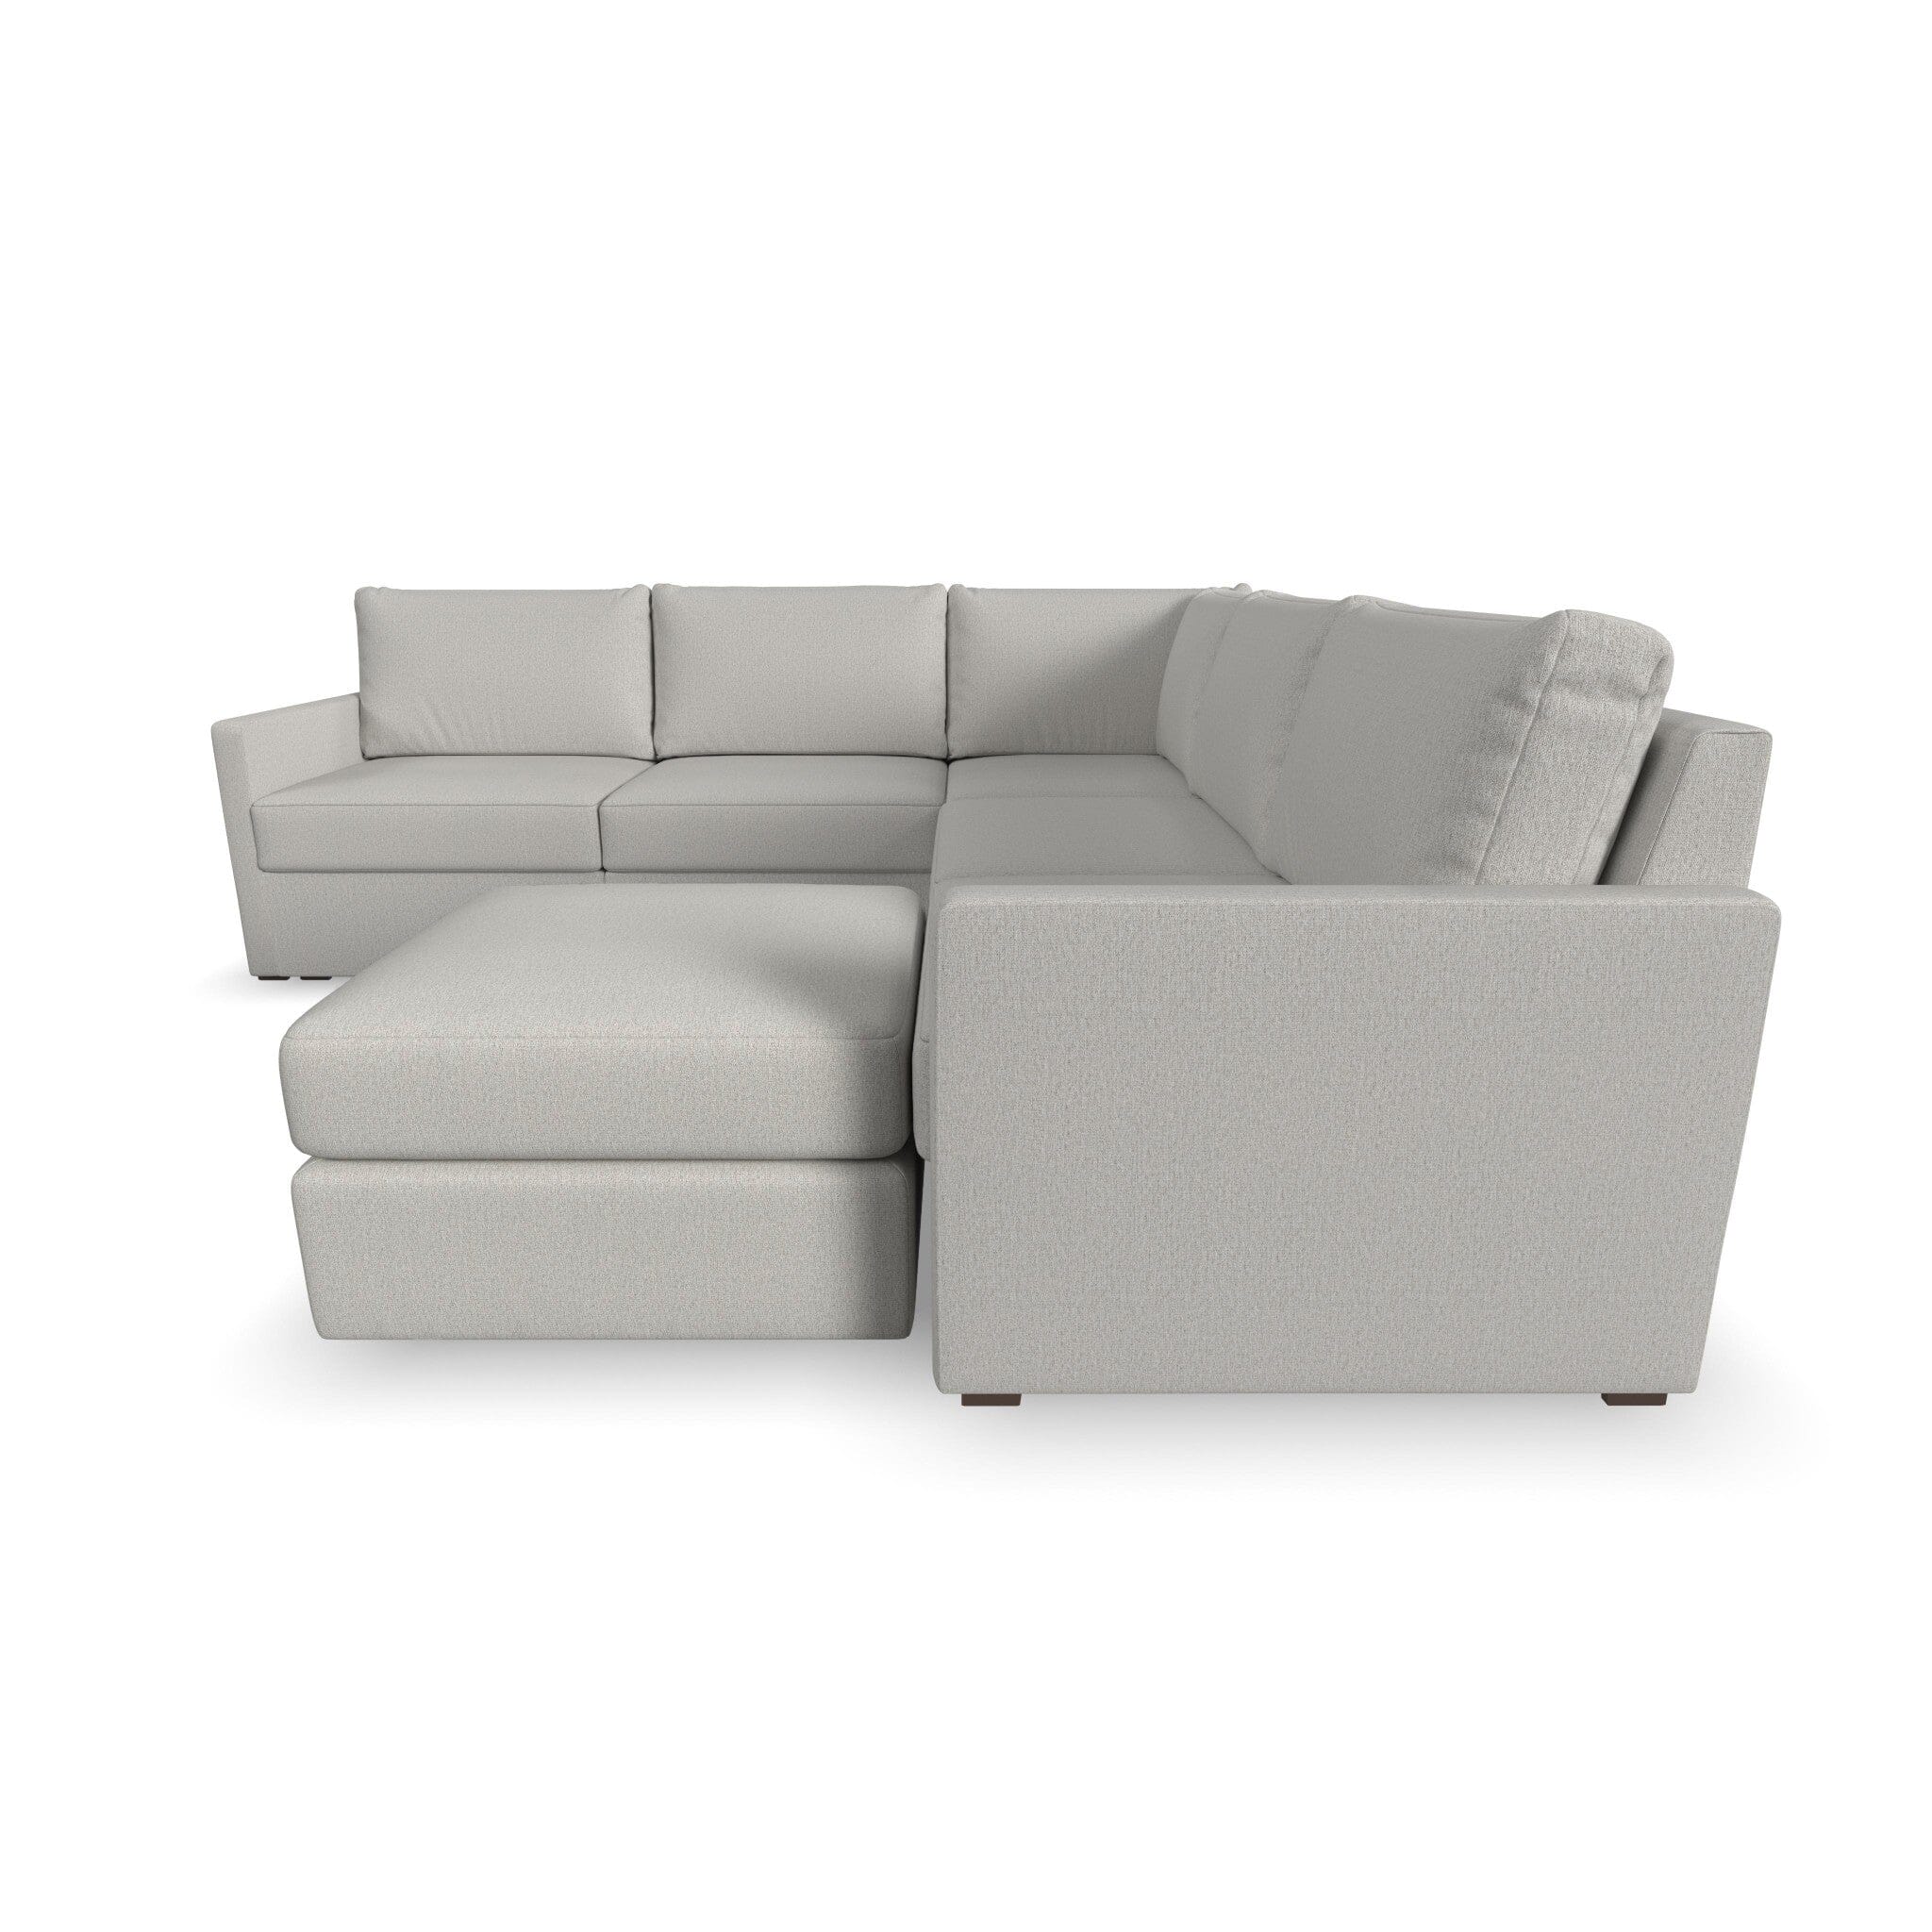 Traditional 5-Seat Sectional with Narrow Arm and Ottoman By Flex Sectional Flex